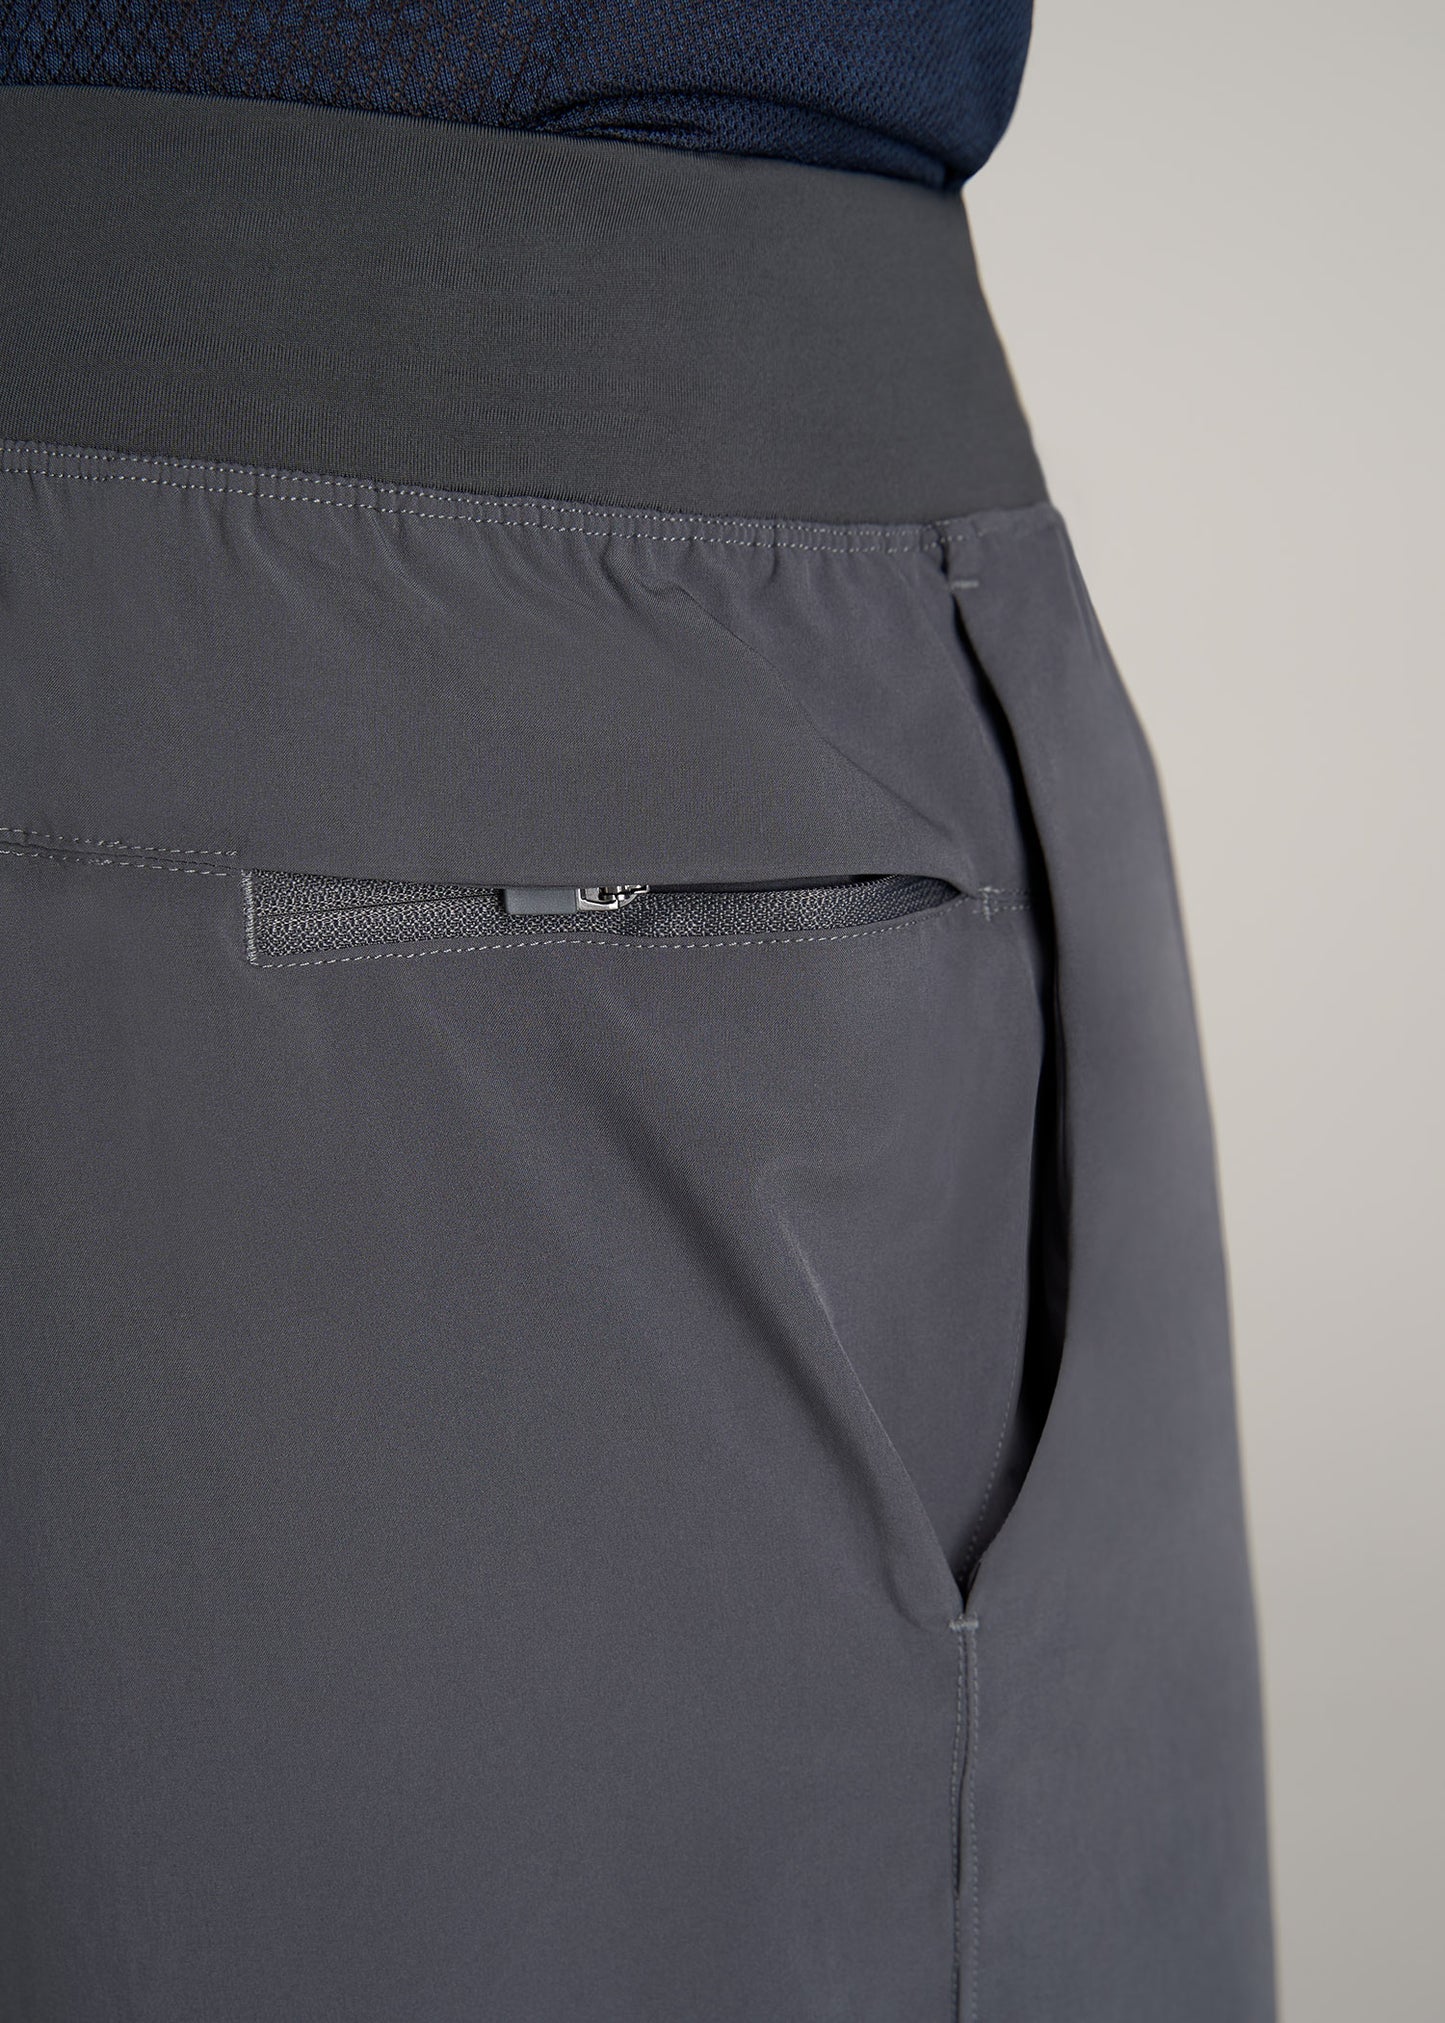    American-Tall-Men-Performance-Stretch-Woven-Shorts-Iron-Grey-detail